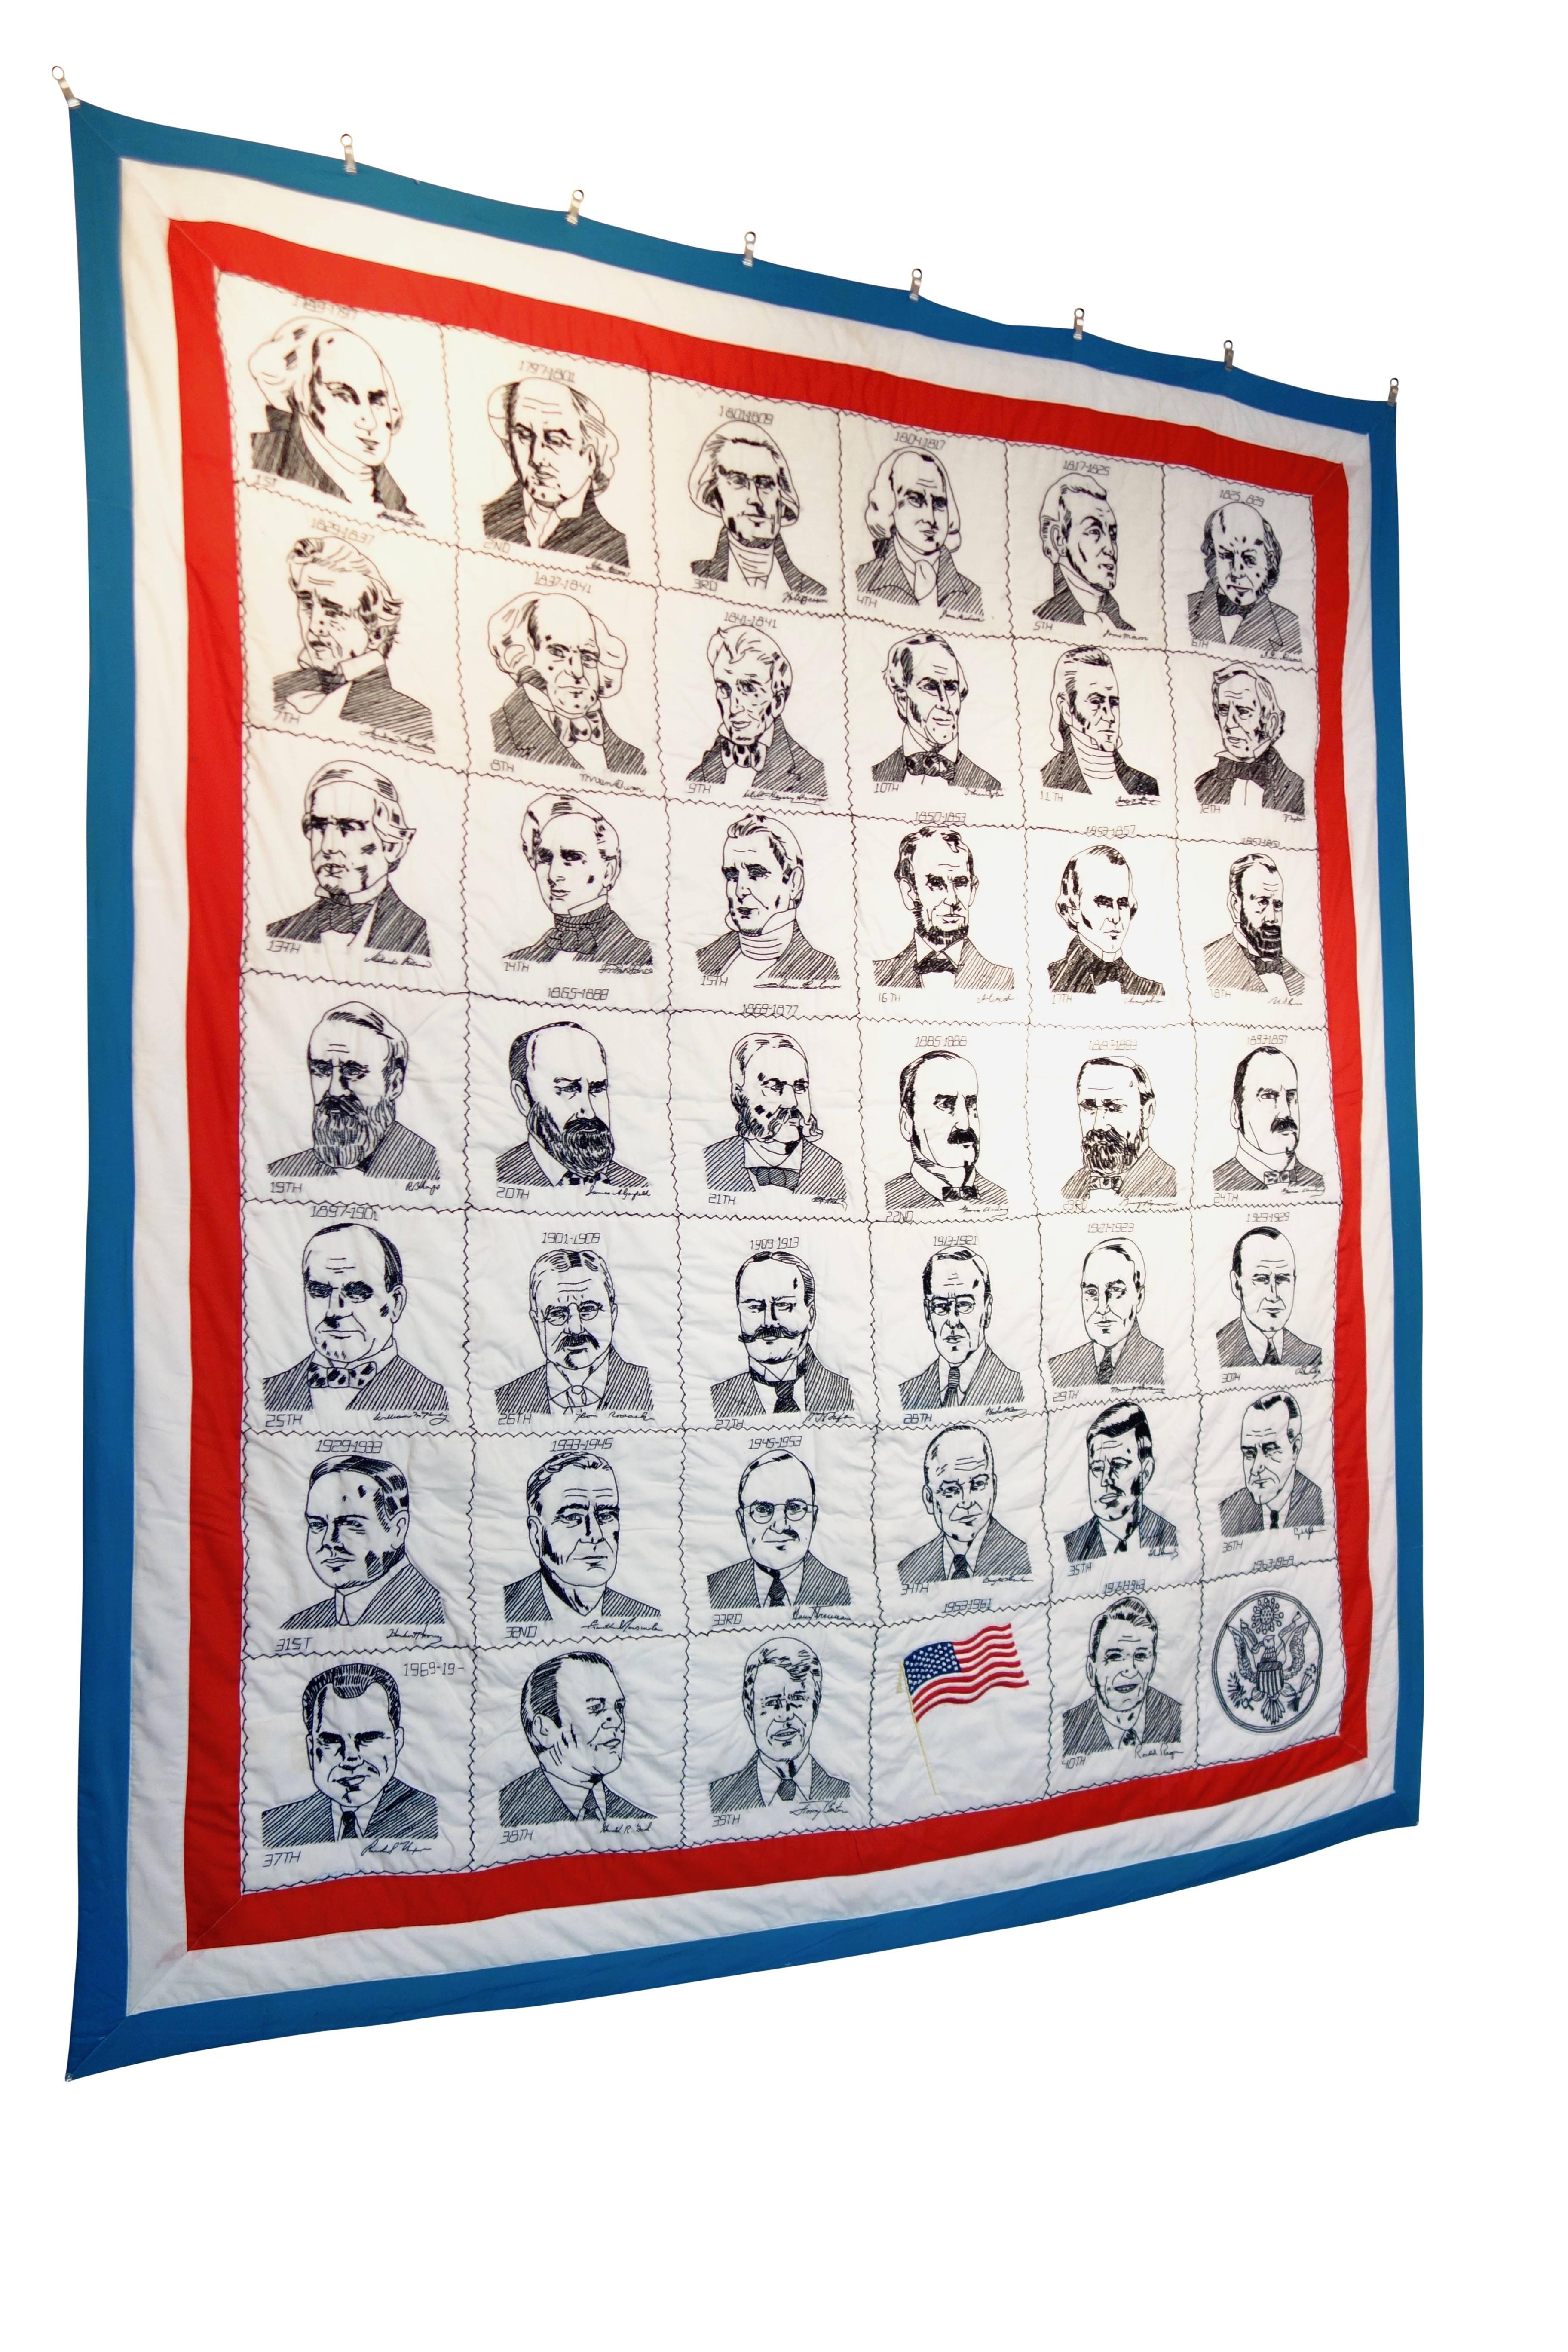 This is a hand embroidered presidential quilt, circa 1980.